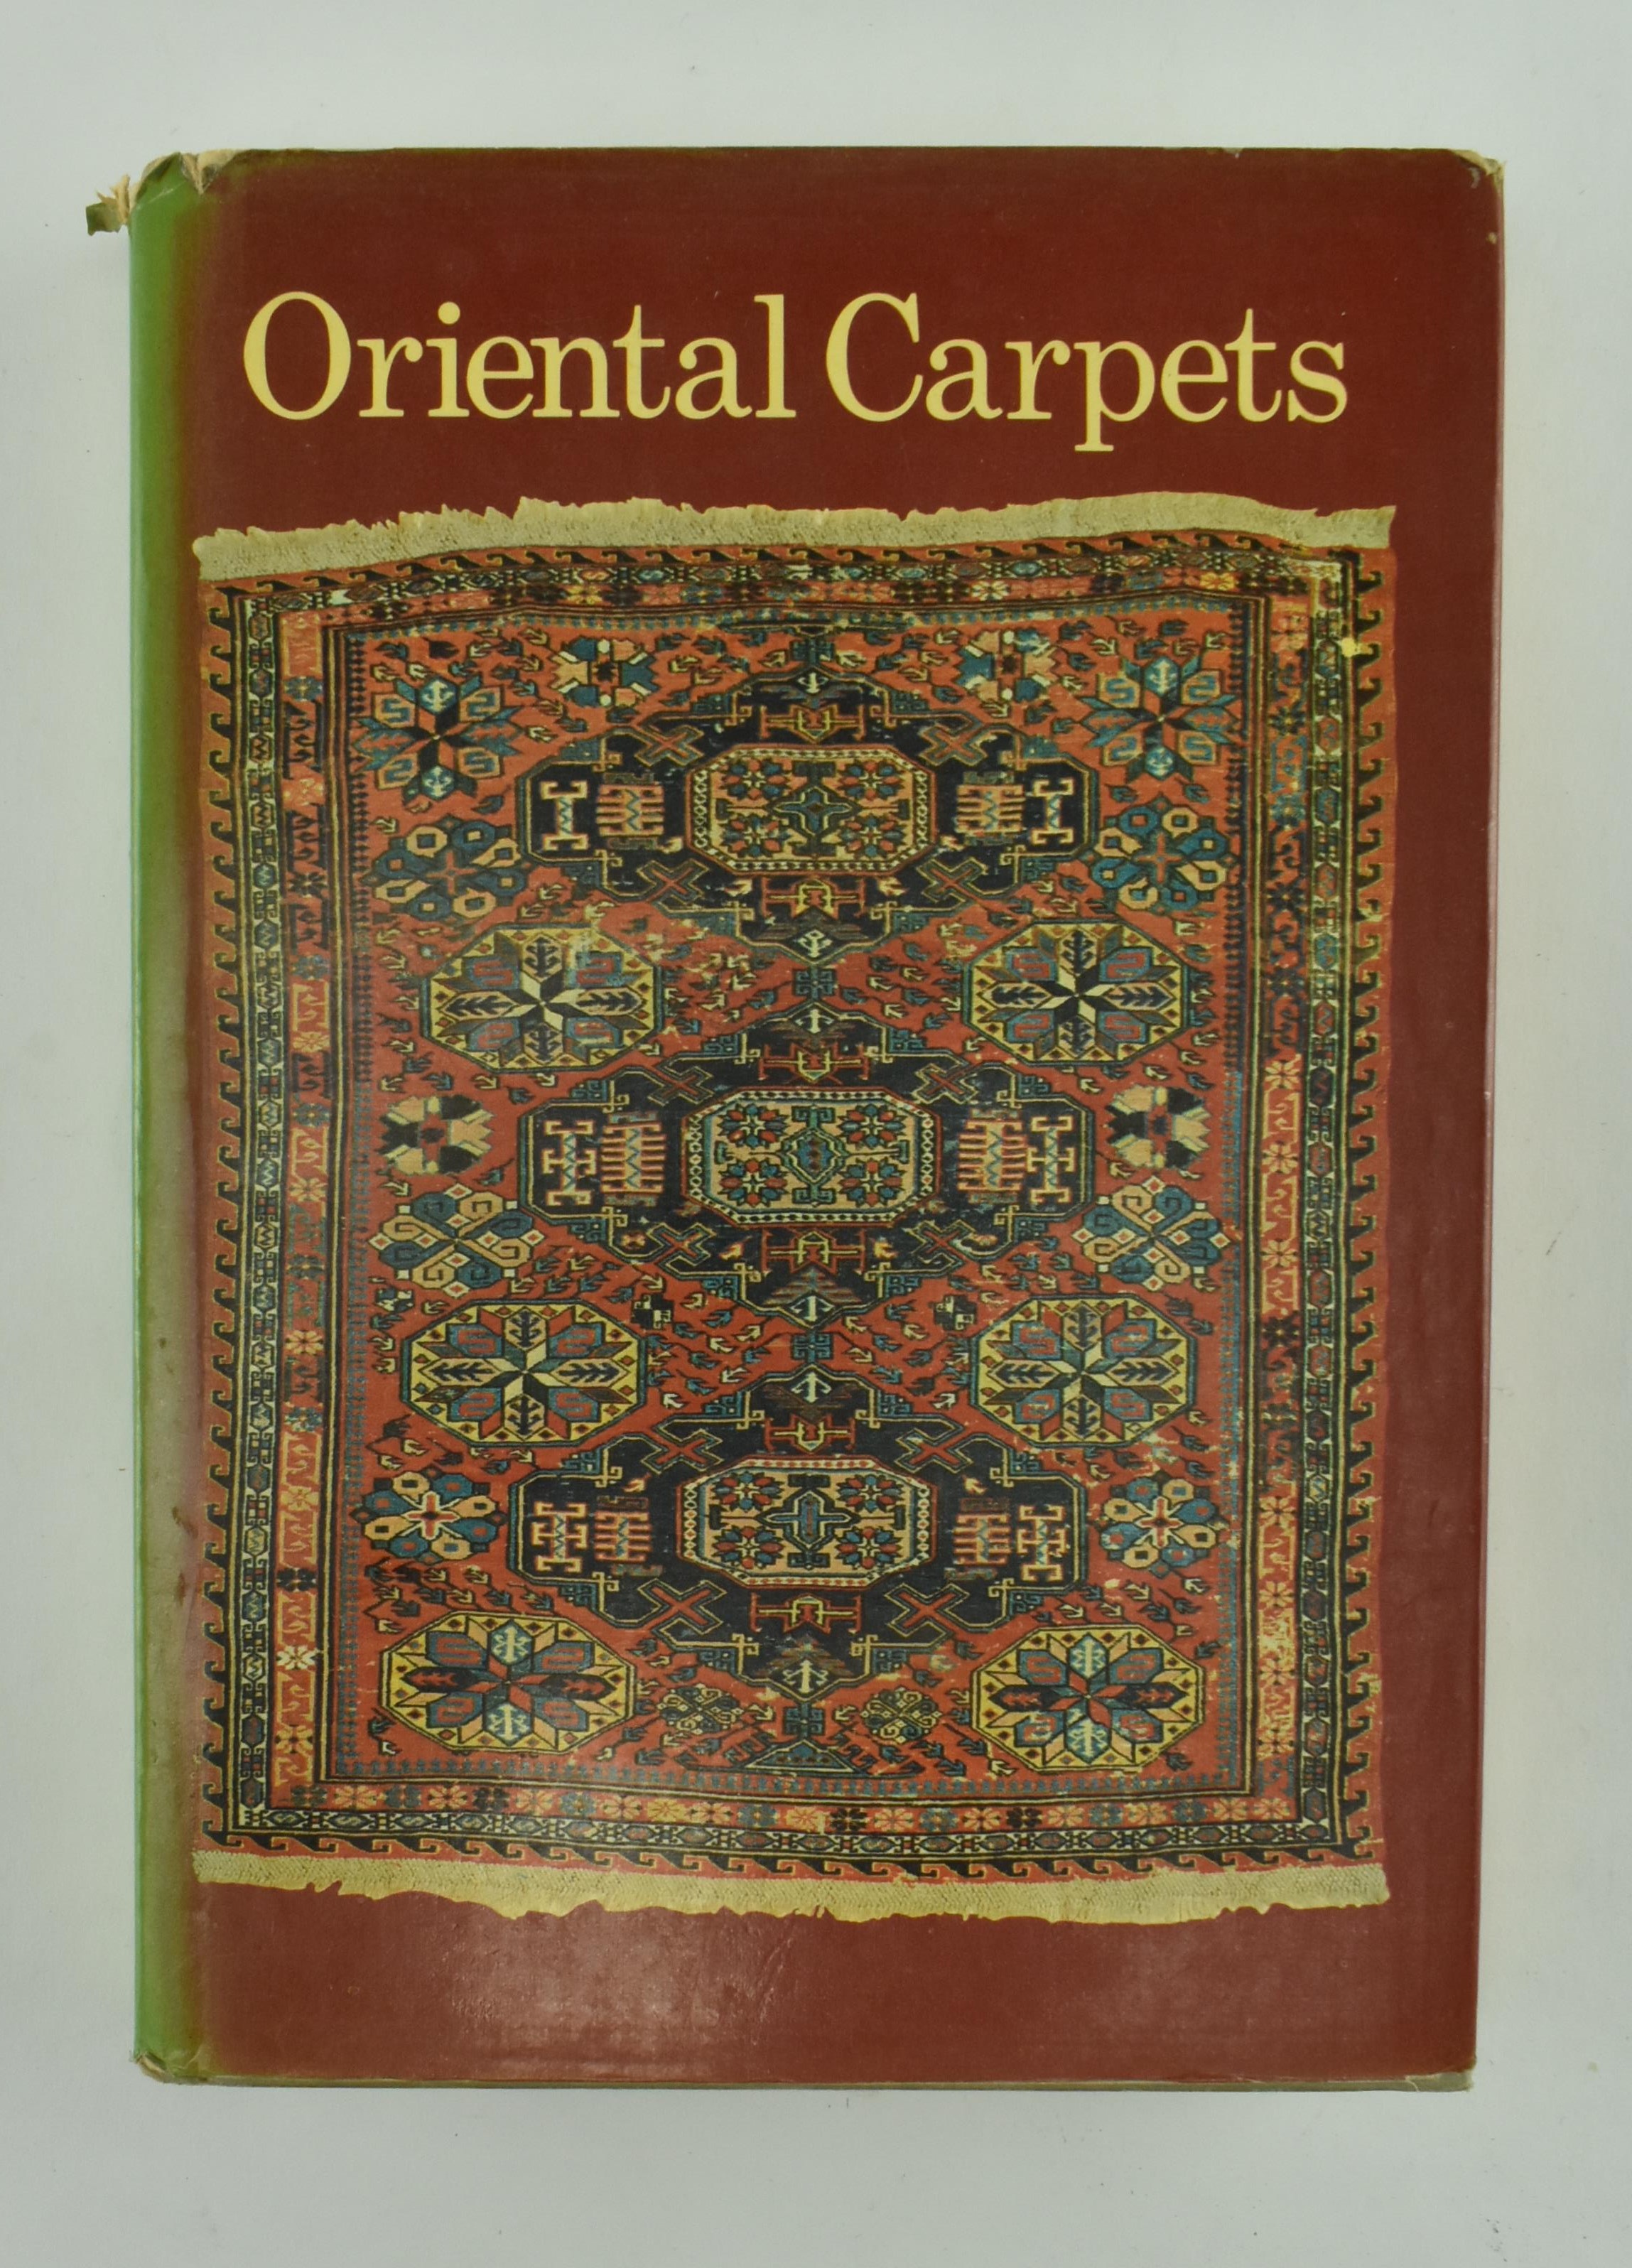 COLLECTOR'S REFERENCE BOOKS. COLLECTION OF BOOKS ON RUGS - Image 8 of 9